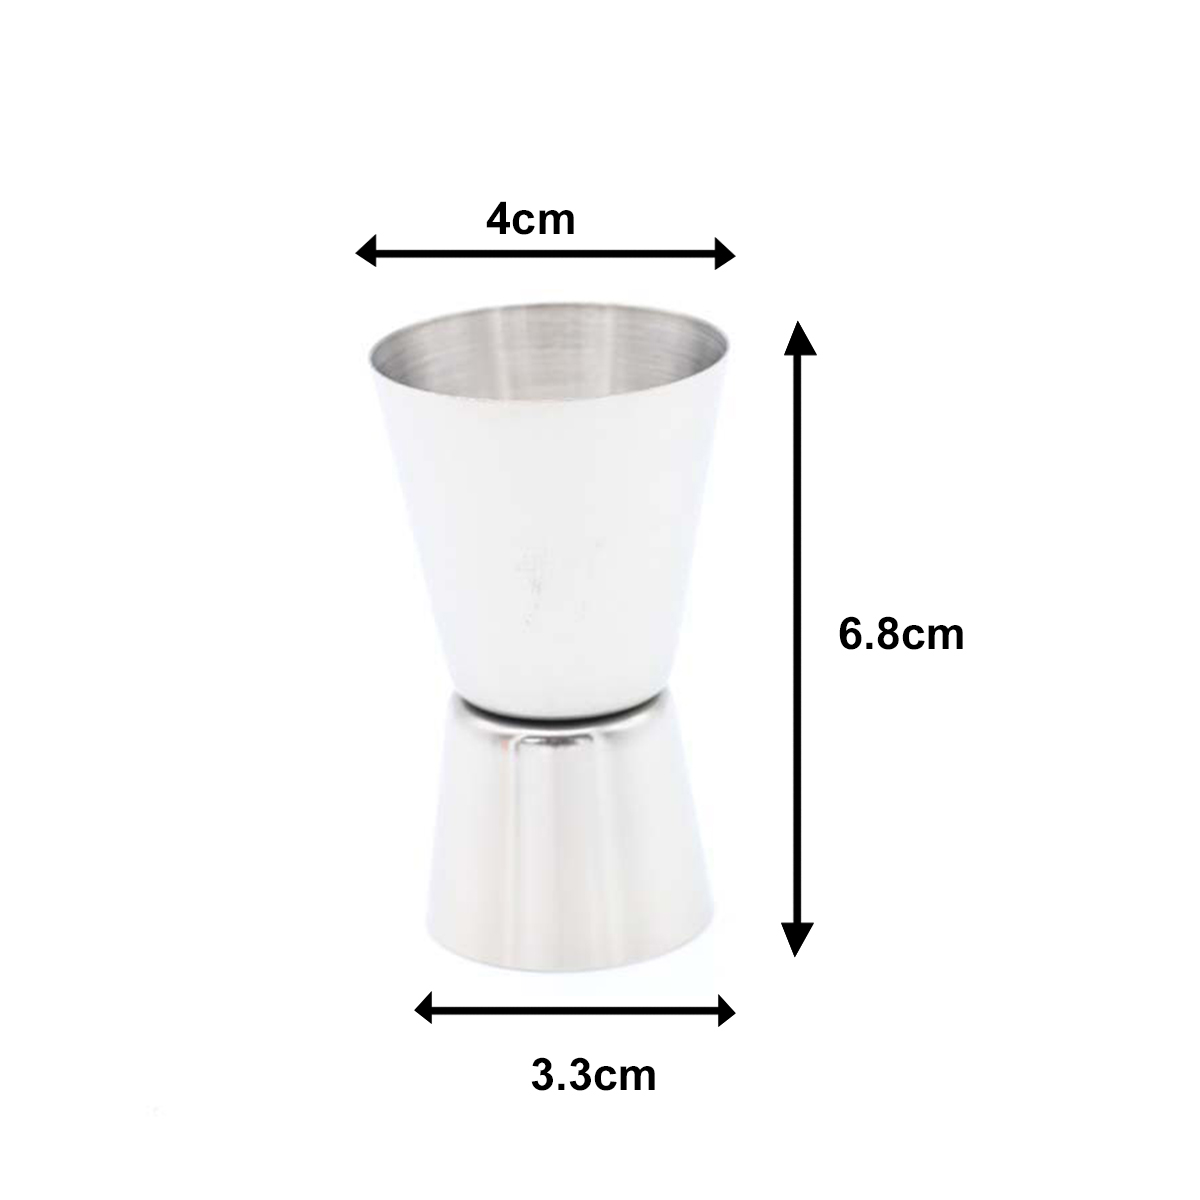 1530ml-Stainless-Steel-Measure-Cup-Drink-Shot-Ounce-Jigger-Bar-Mixed-Cocktail-Tool-1719705